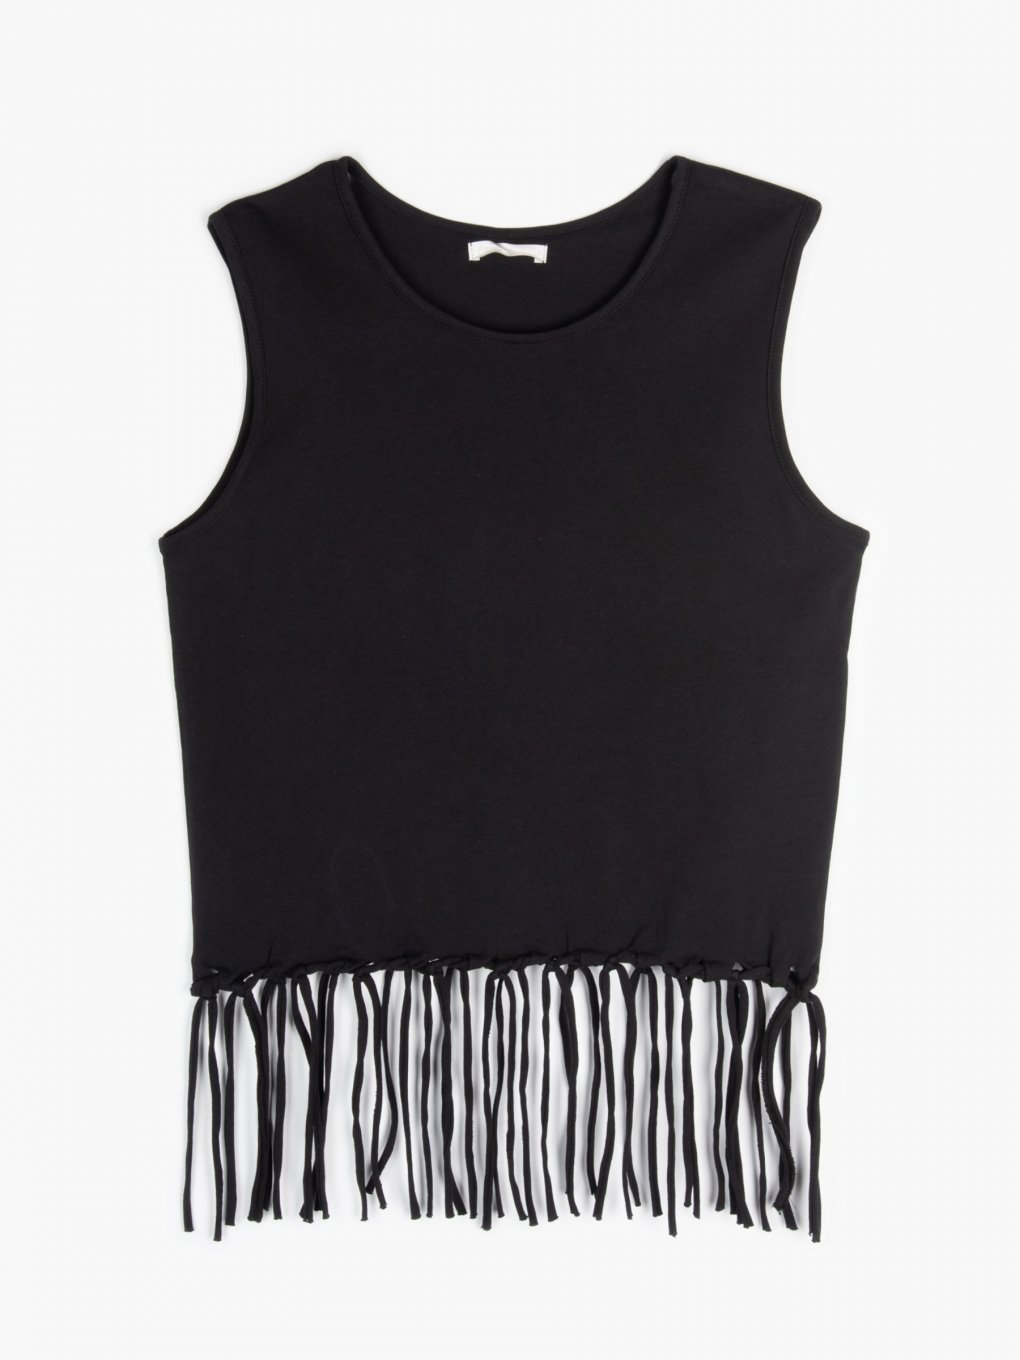 Cotton tank with fringes